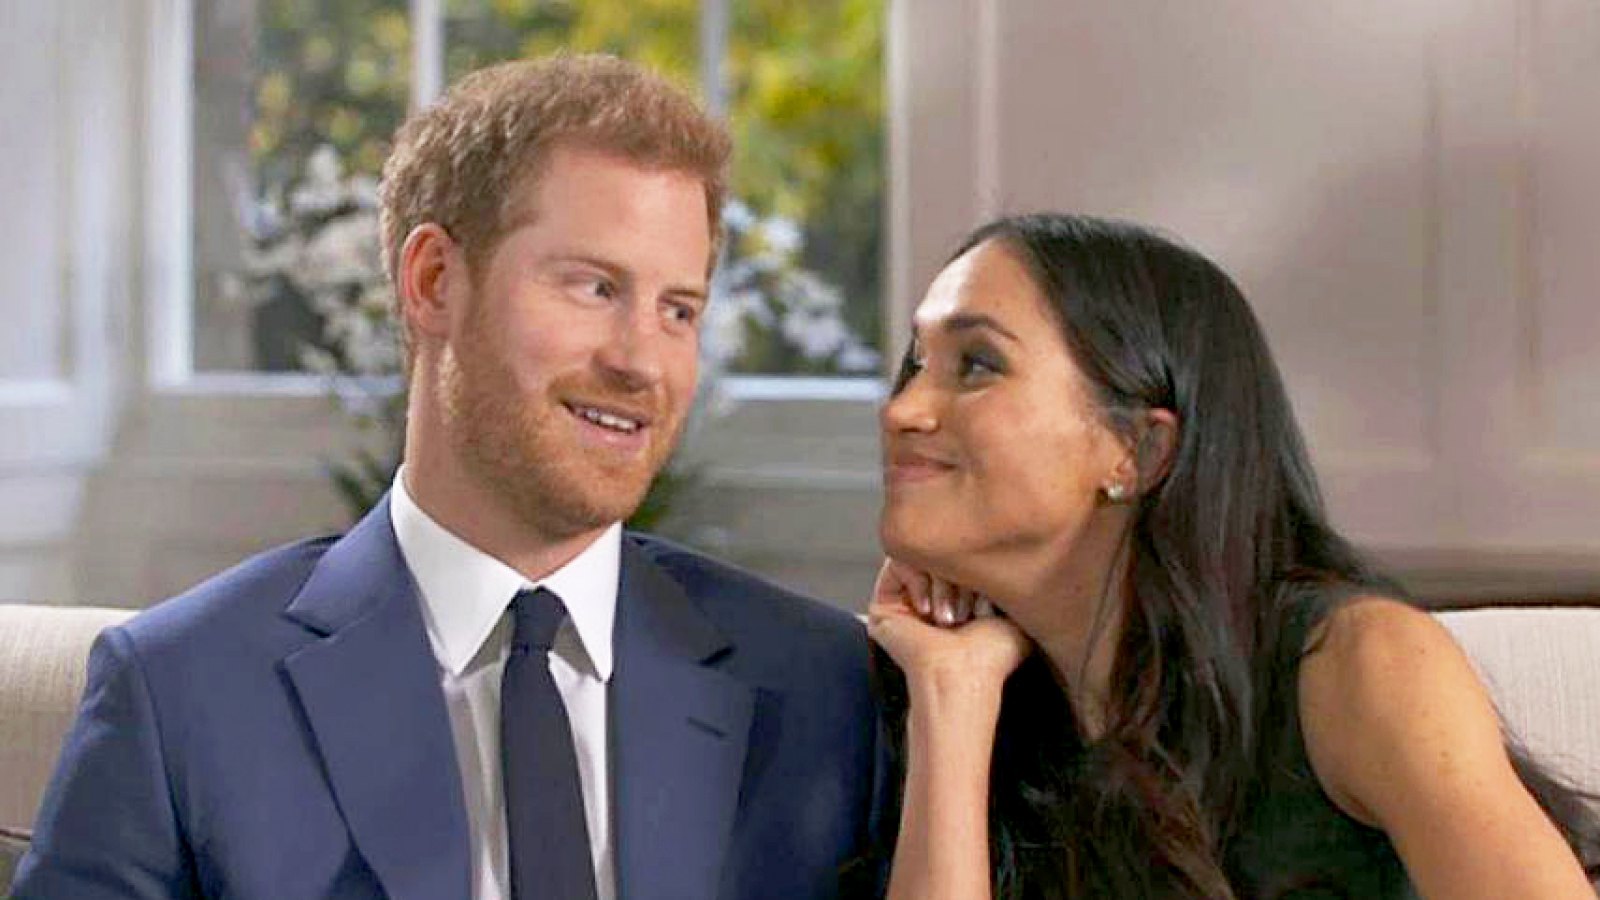 Prince Harry and Meghan Markle during interview outtakes